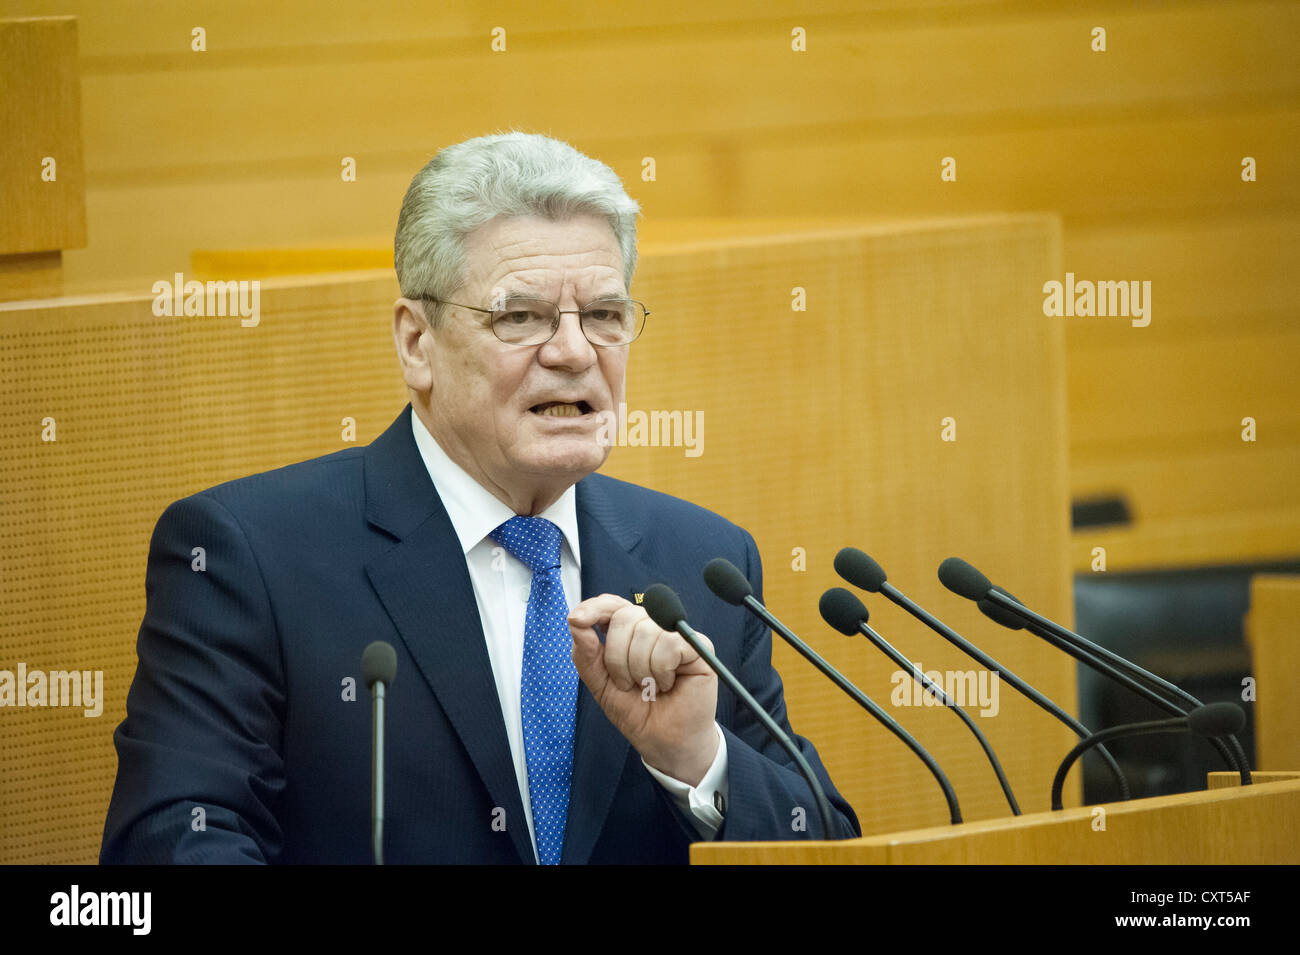 Federal President Joachim Gauck addressing the MPs in the Landtag, state parliament, inaugural visit of Federal President Stock Photo